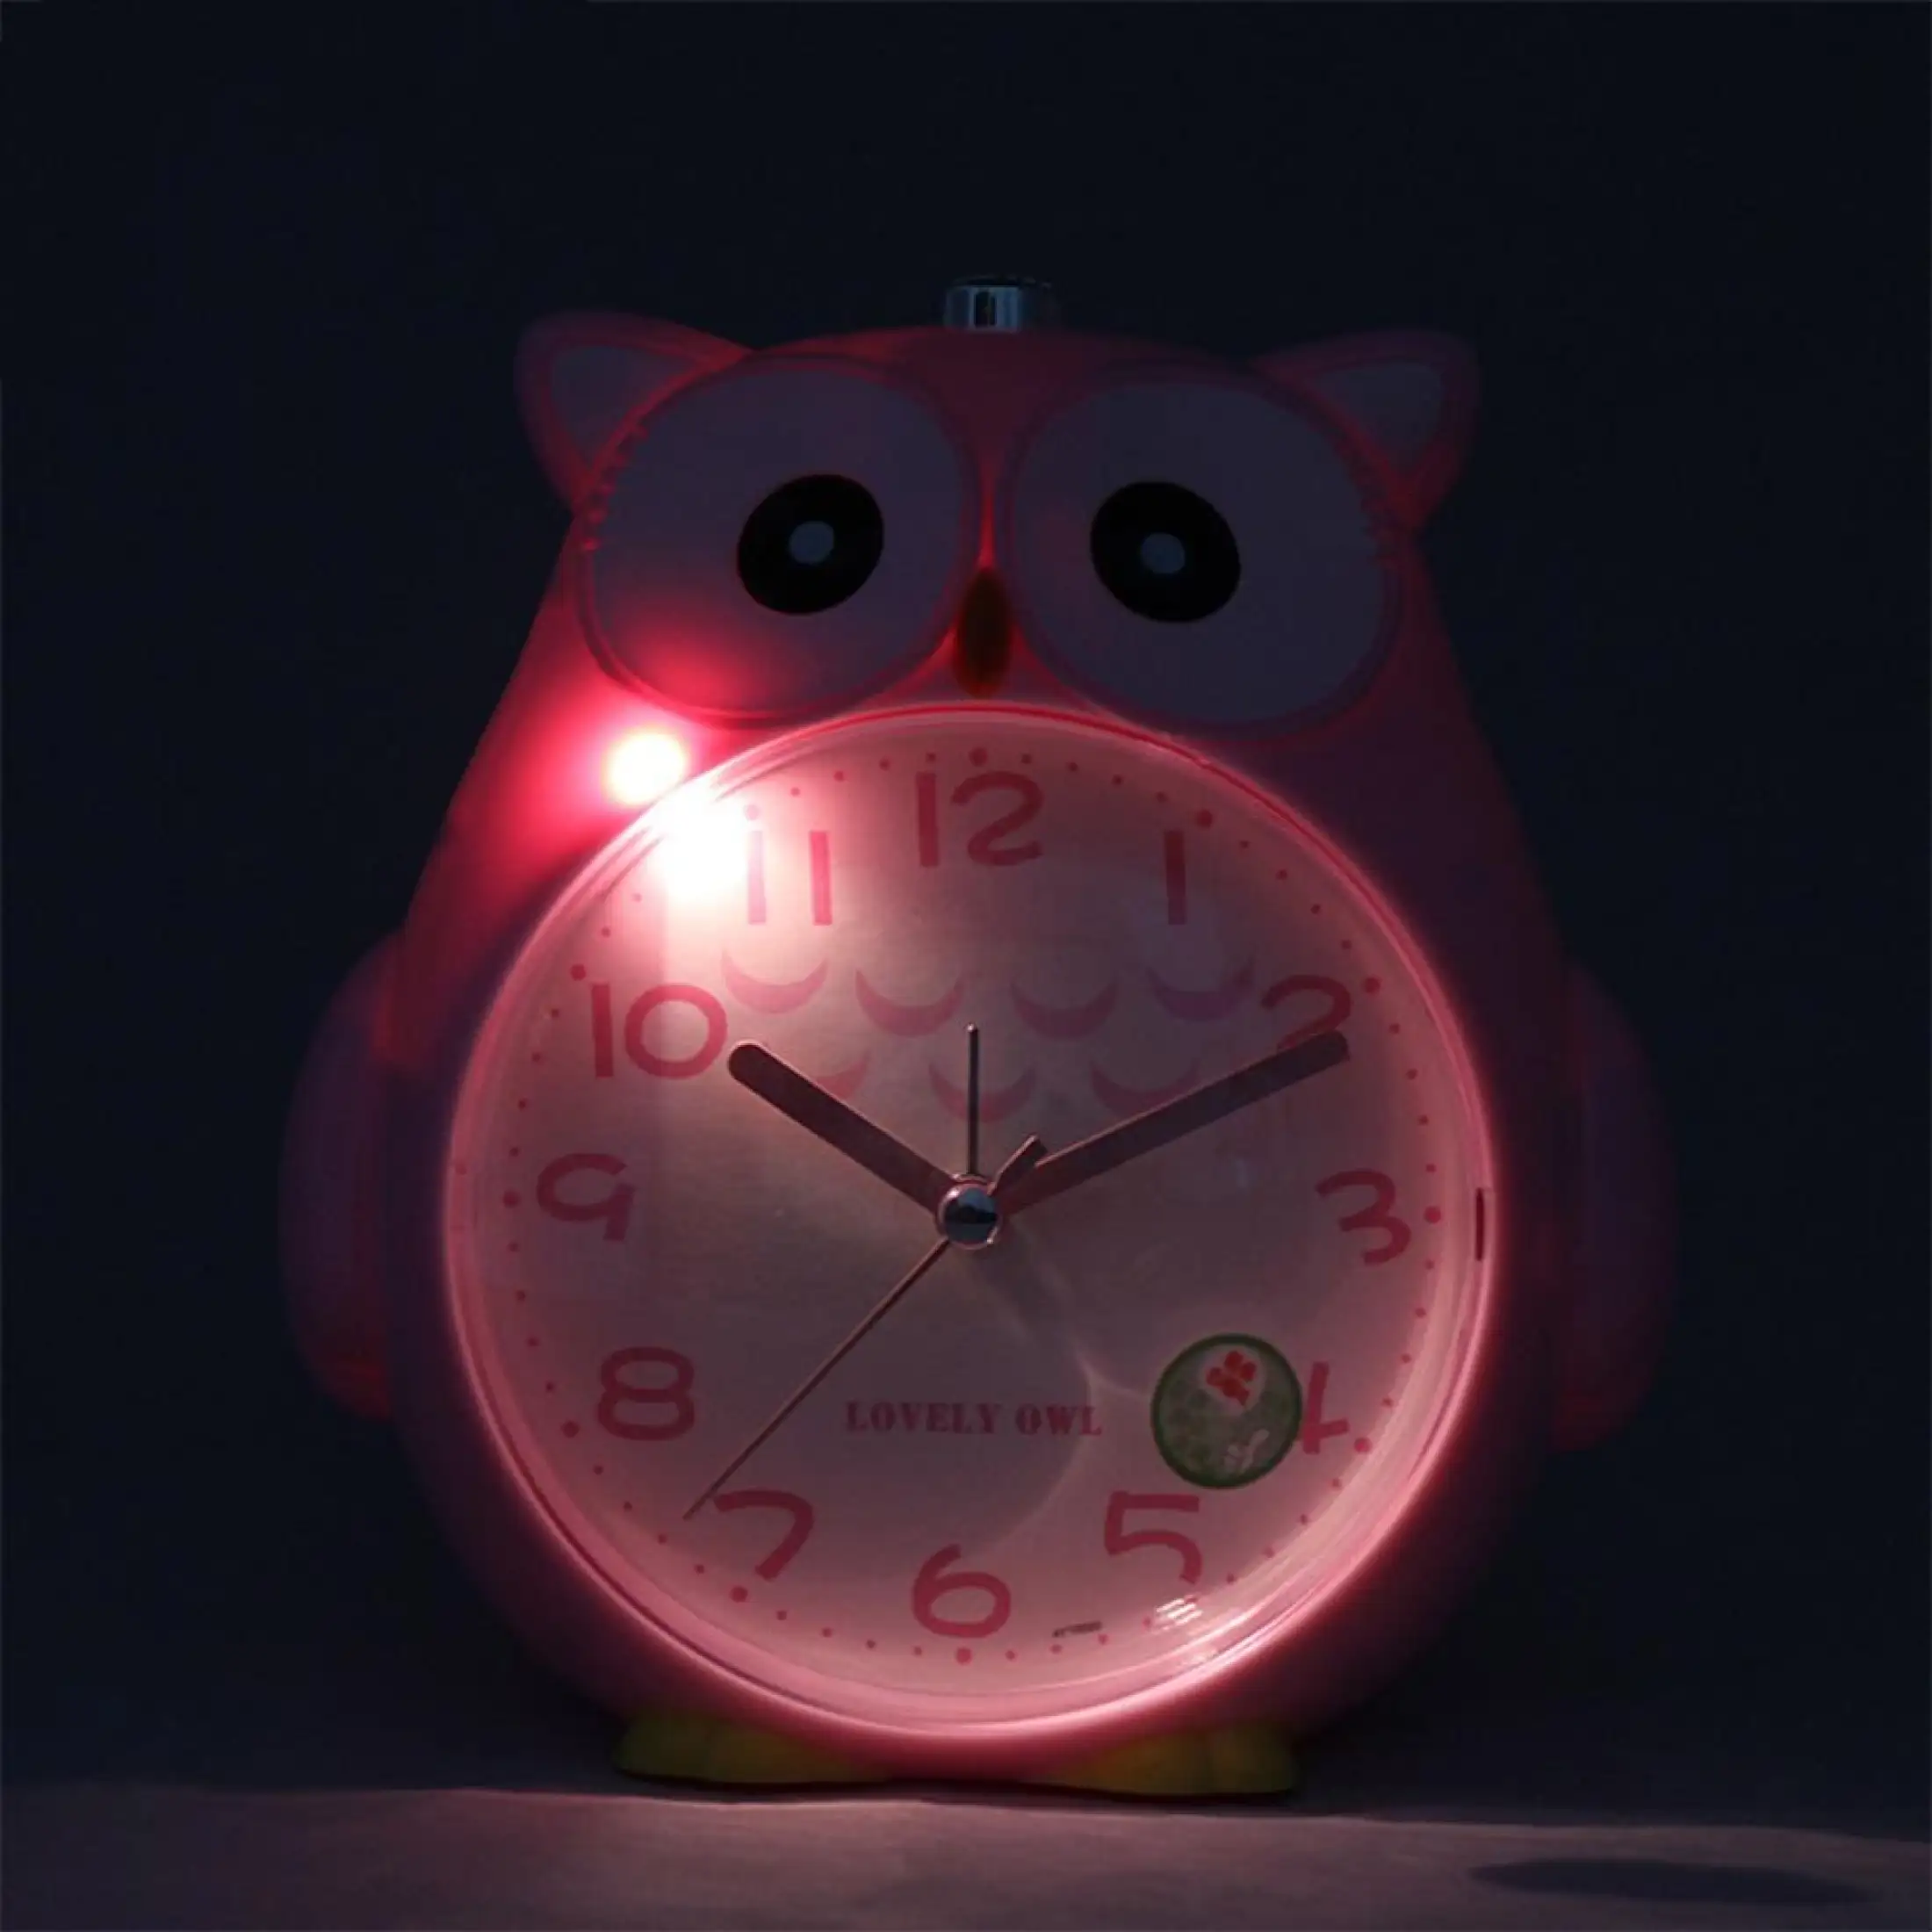 Baby Cute Owl Shaped Silent Night Light Boys,Girls spier Kids Alarm Clock Kids Room Snooze Function Silence Clock for Childrens Day 